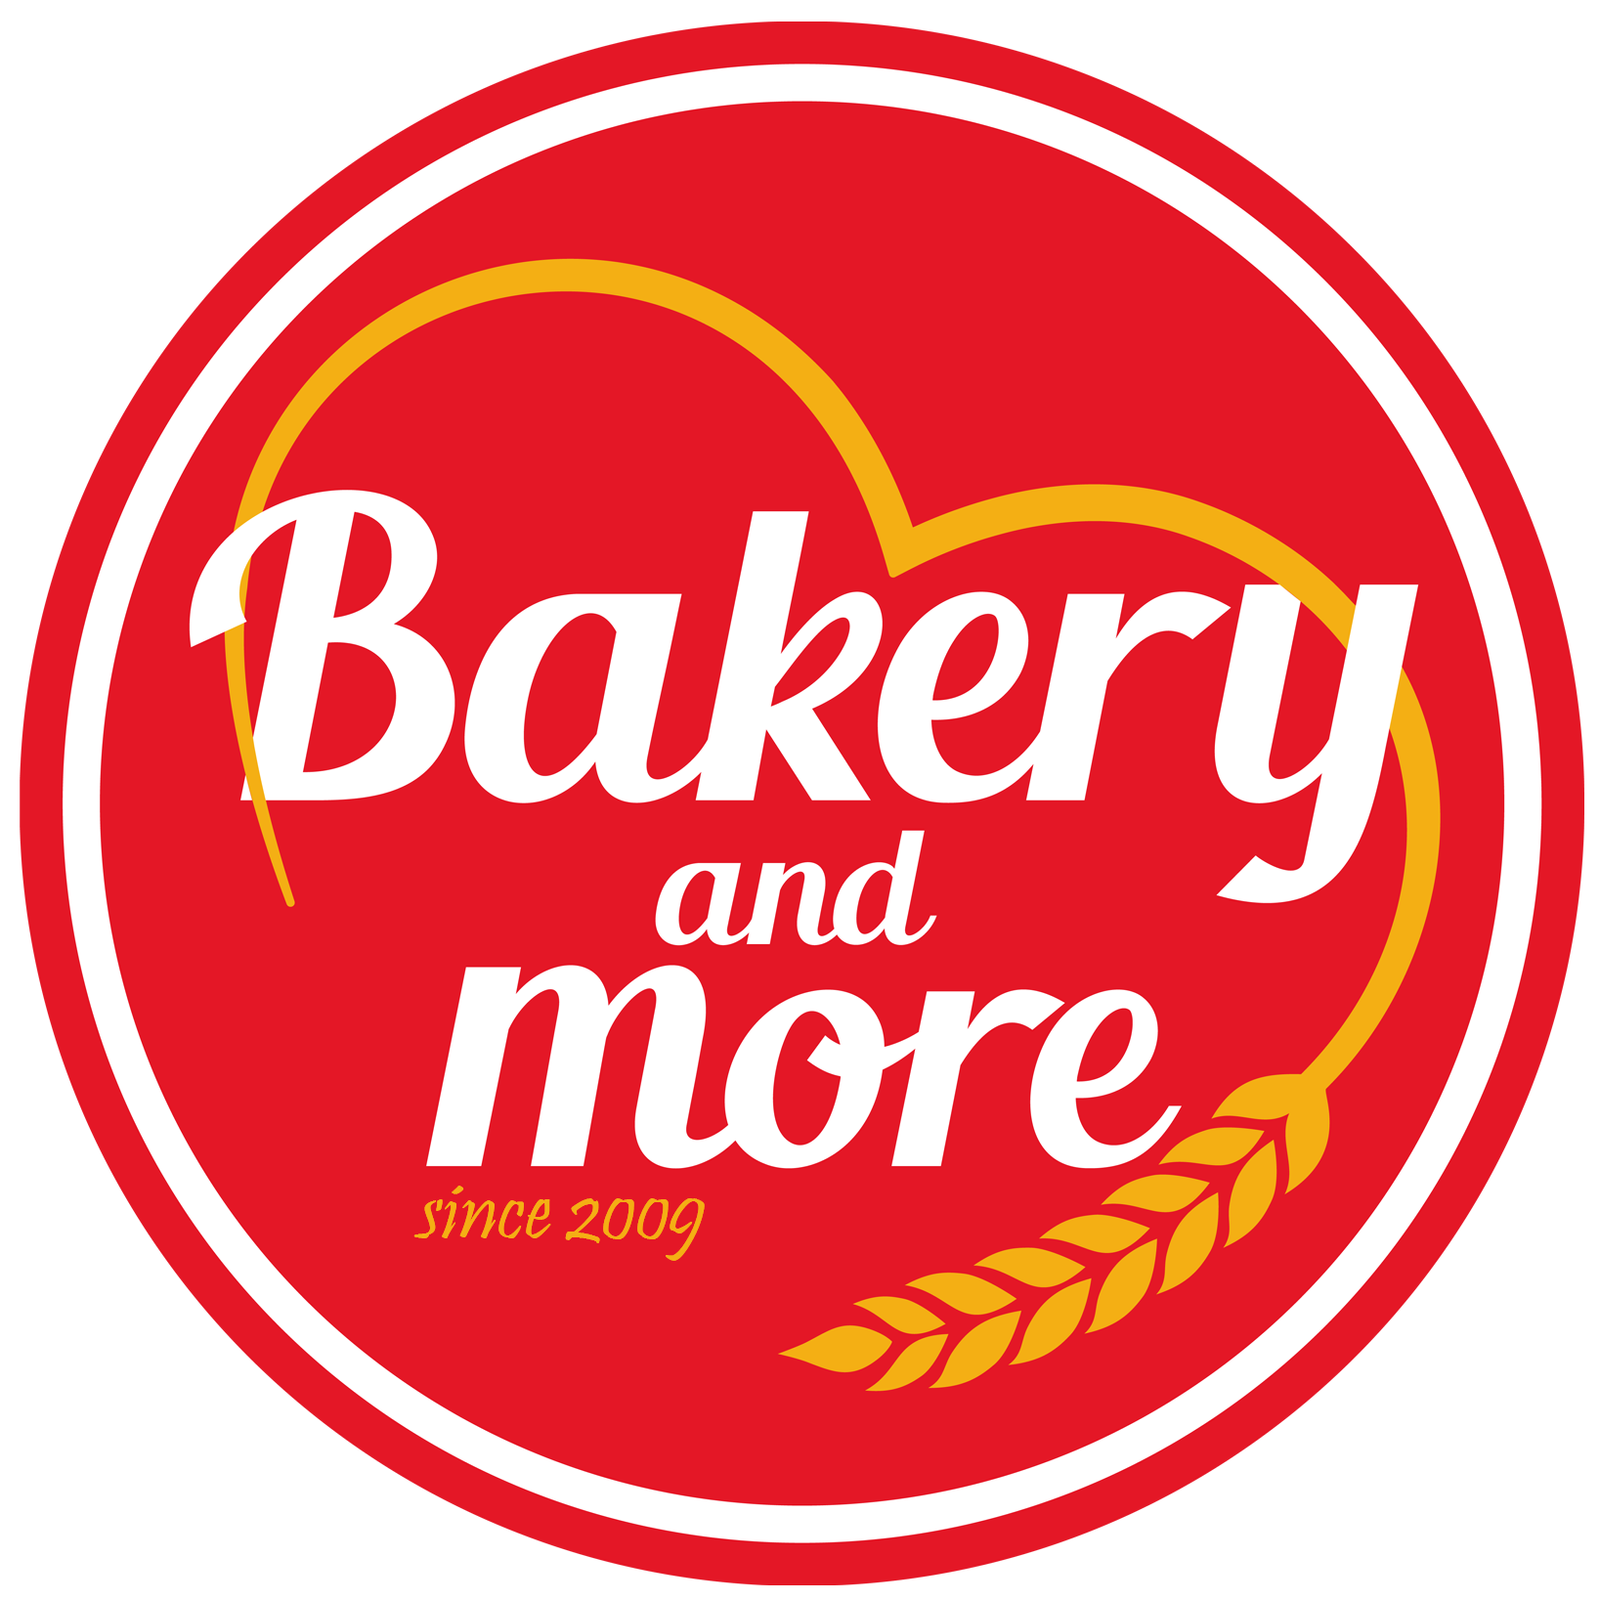 BAKERY AND MORE